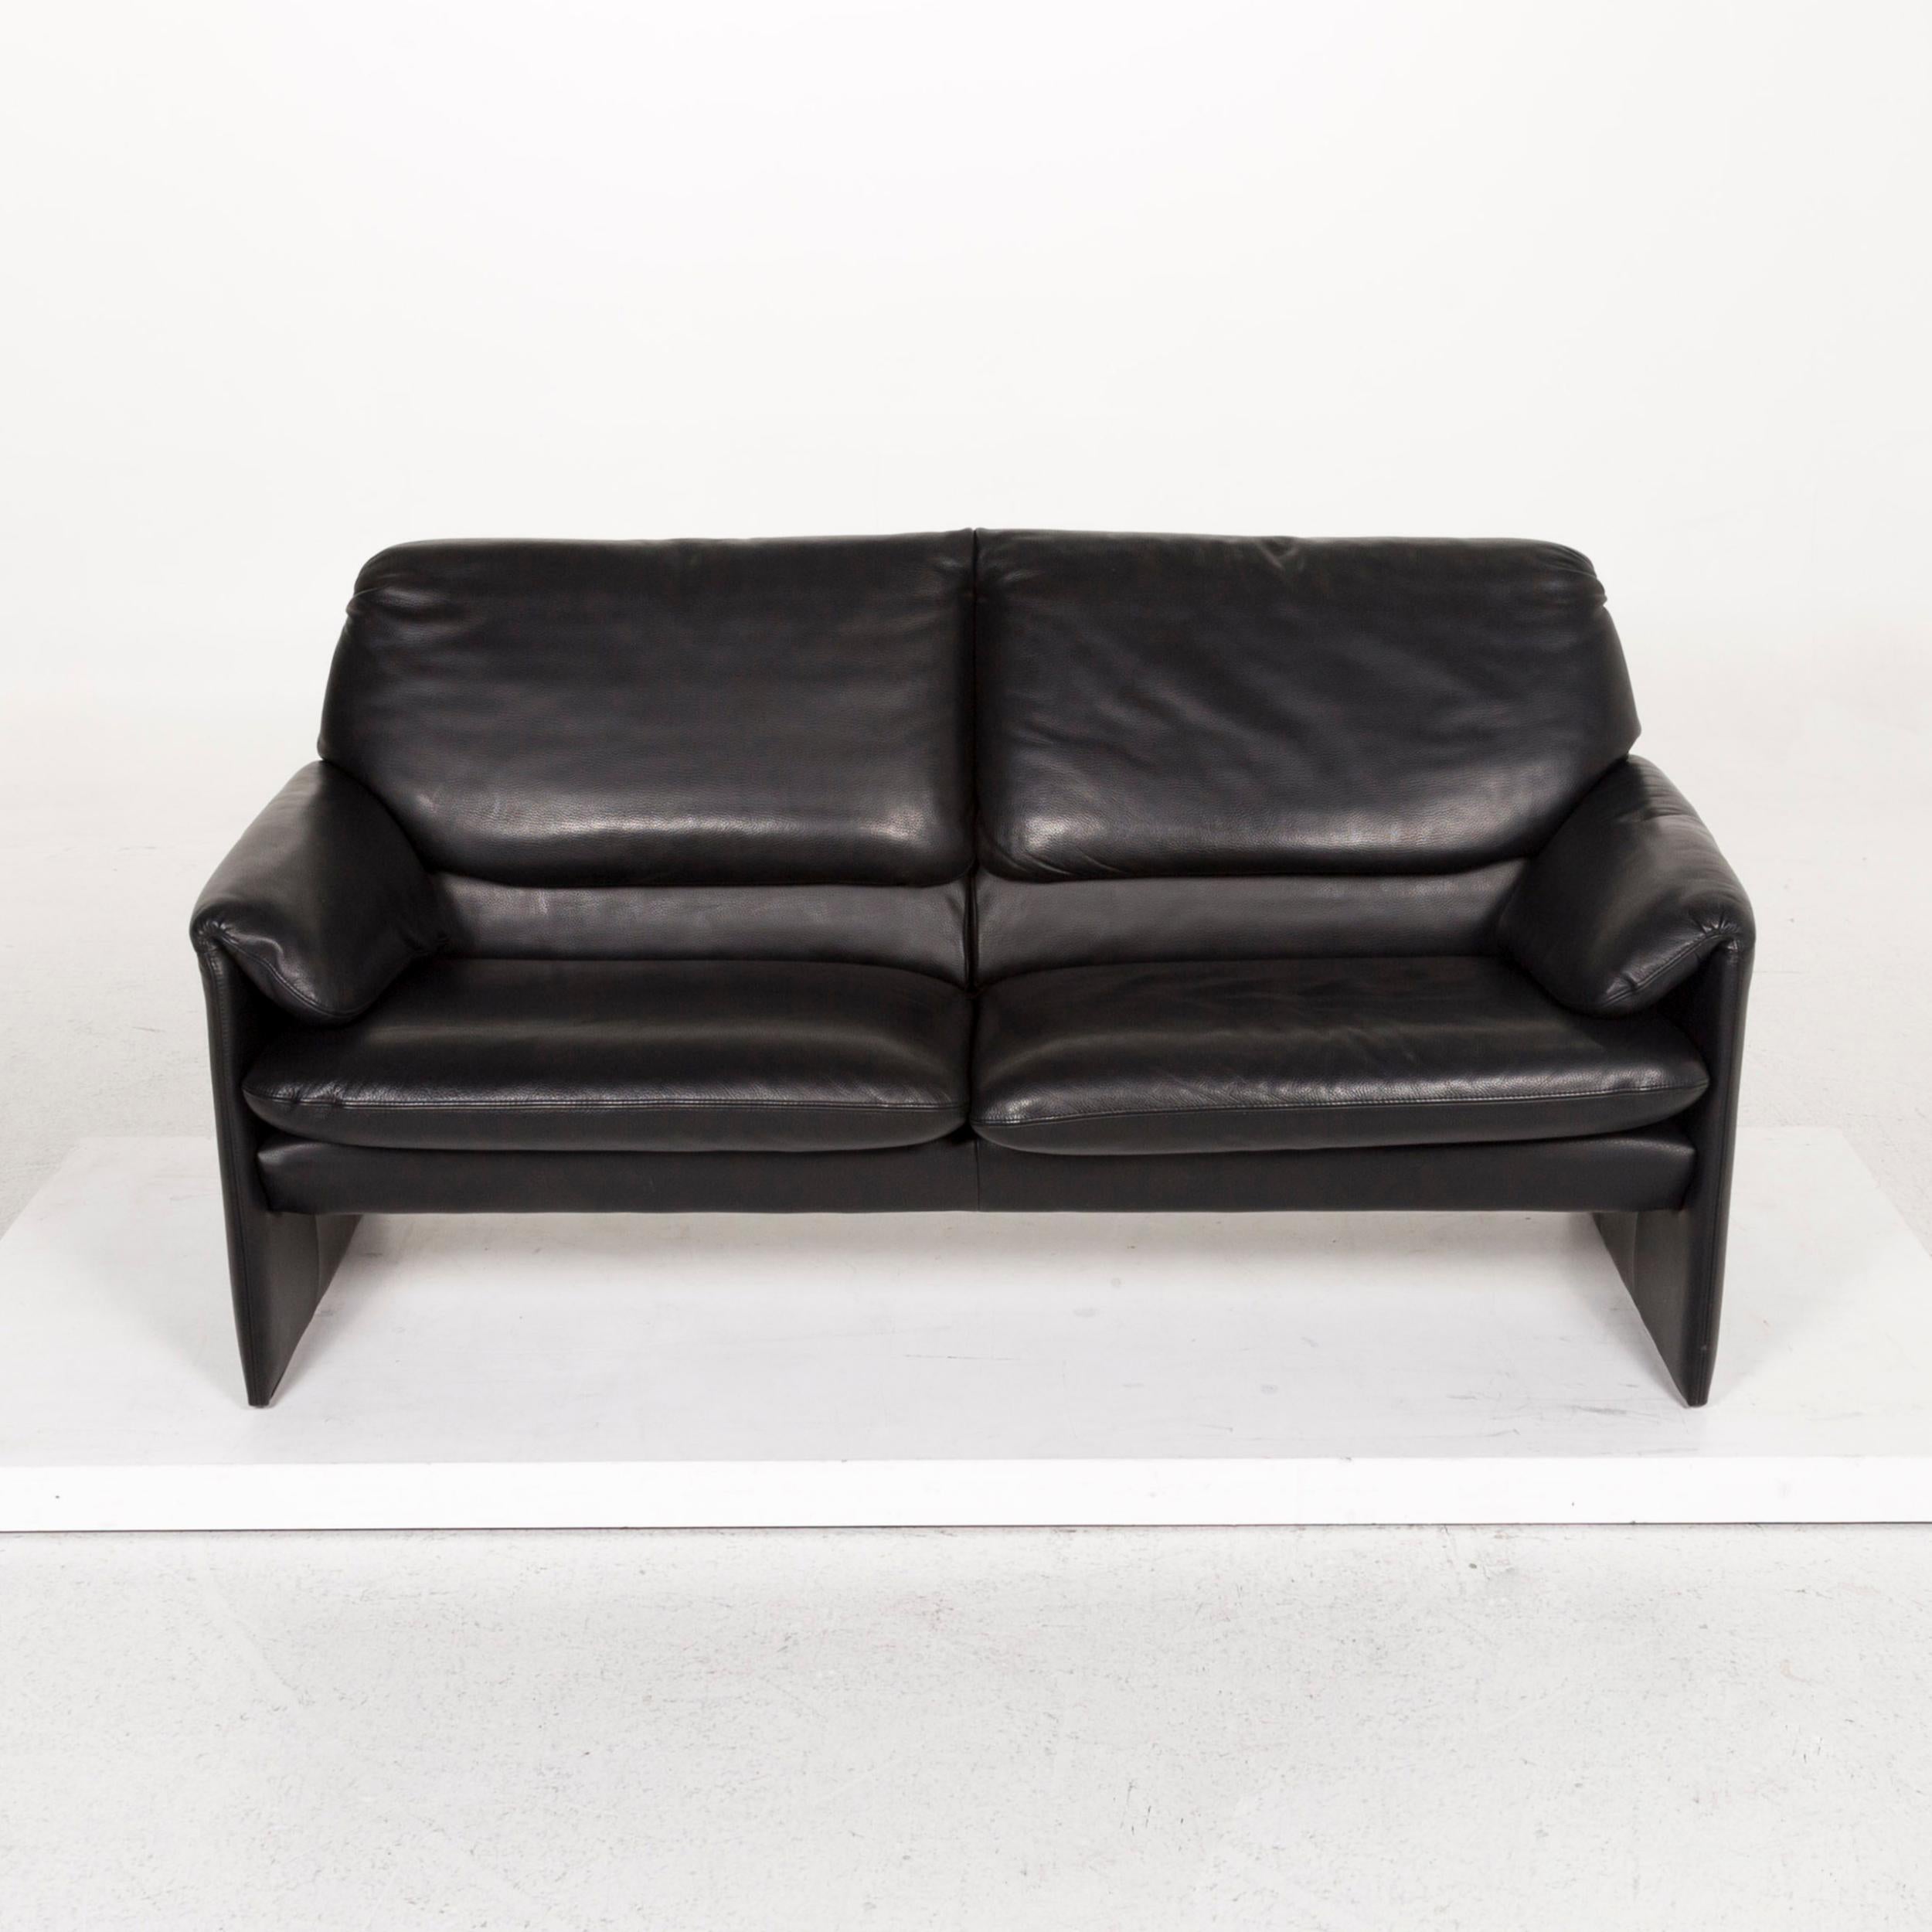 Leolux Leather Sofa Black Two-Seat Couch For Sale at 1stDibs